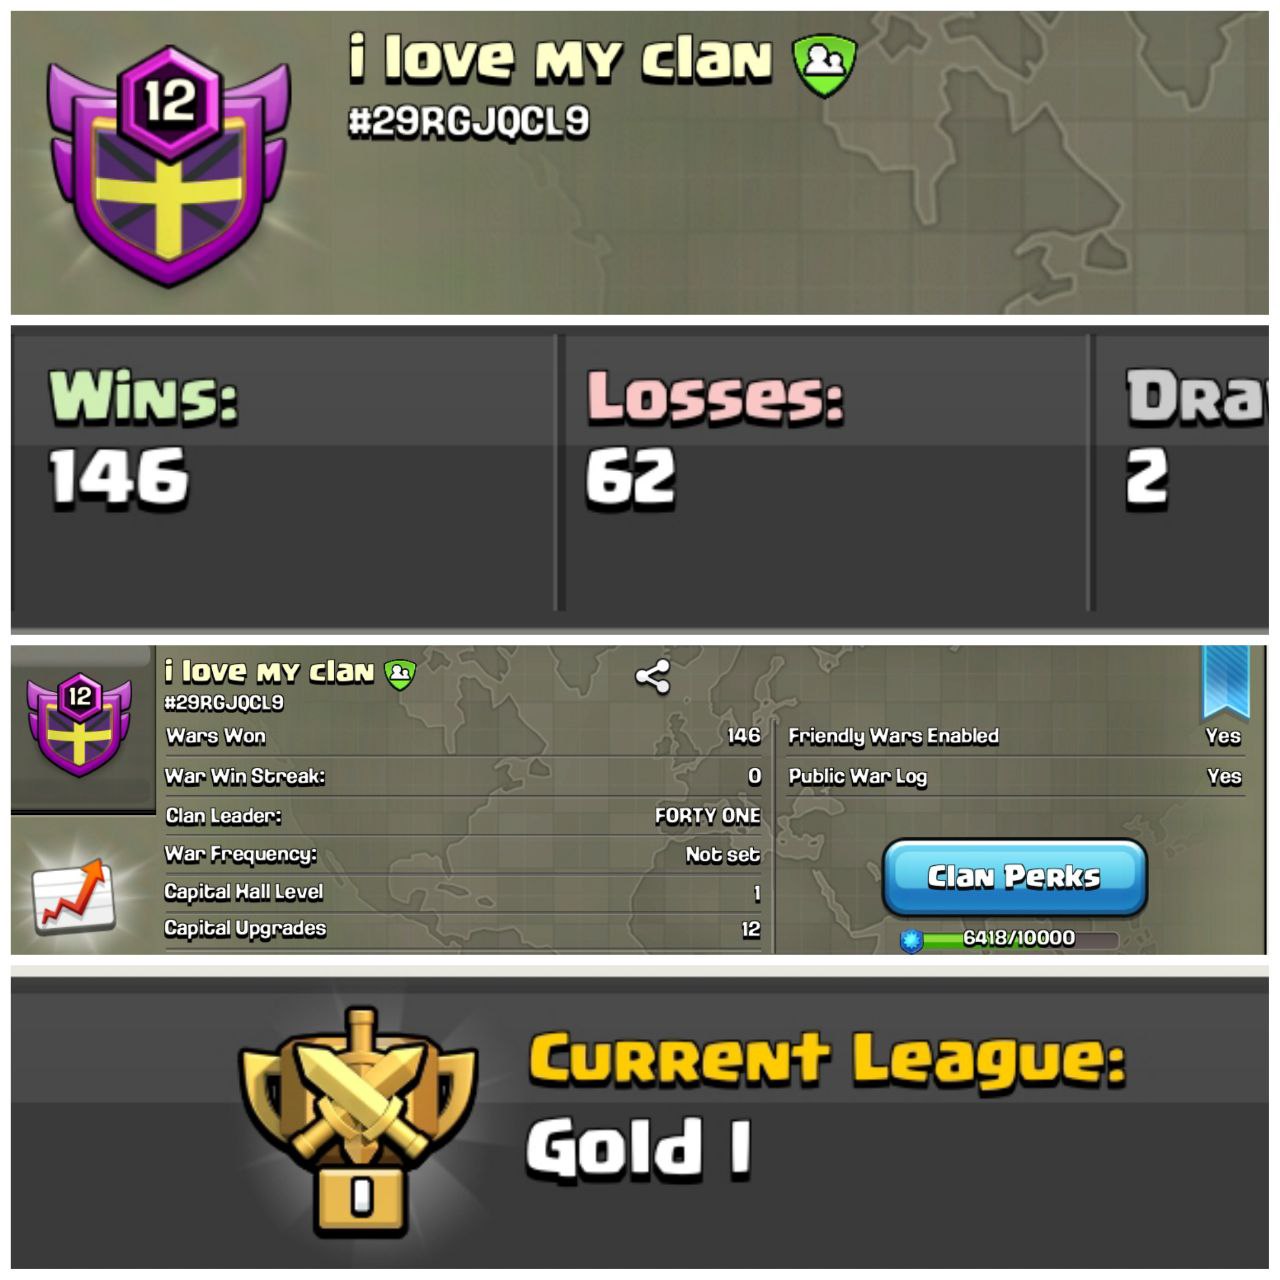 I love my clan - Lvl-12 -- Postive Log -- Gold 1 -- Brilliant and Superb Name And League